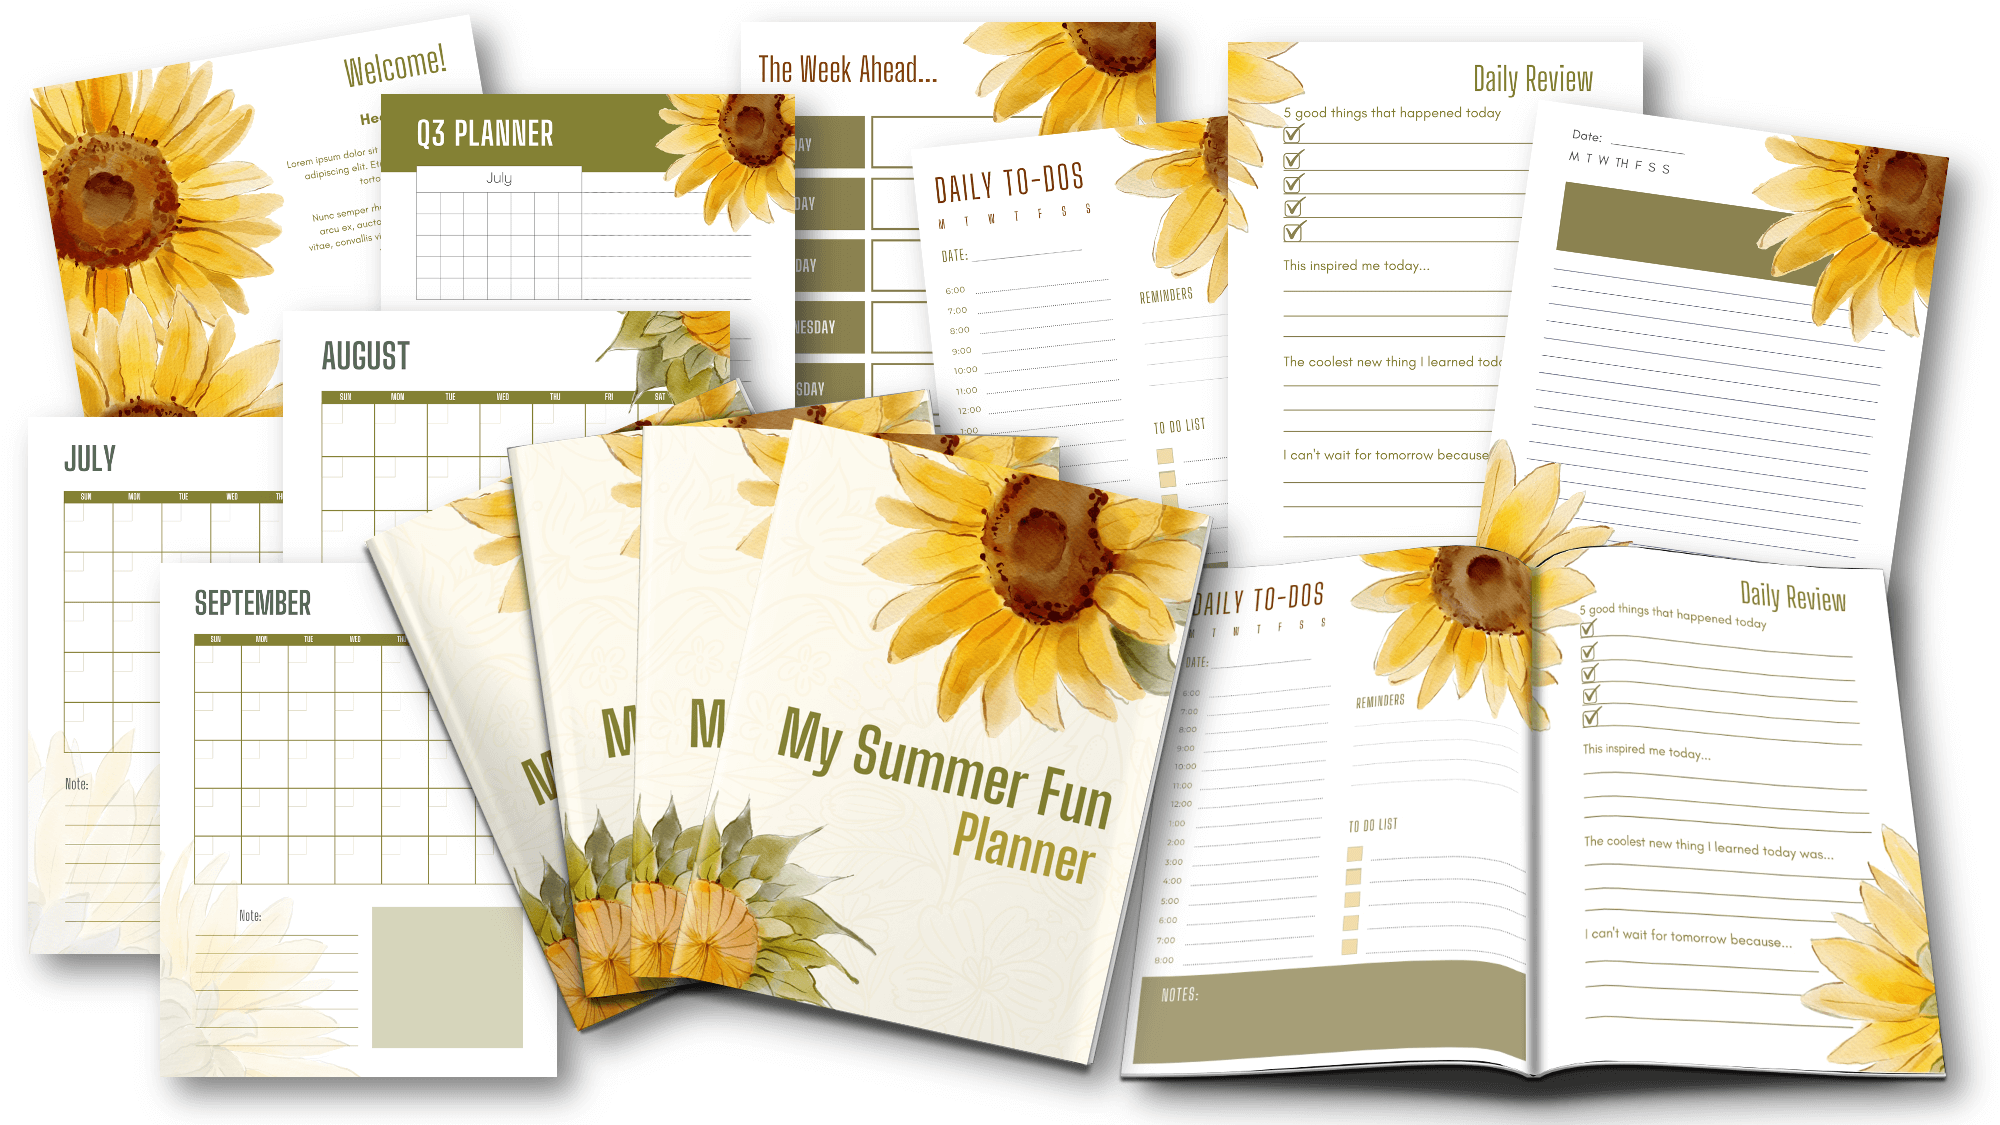 Year of Journaling PLR bundle Summer Planner interior pages marketing image